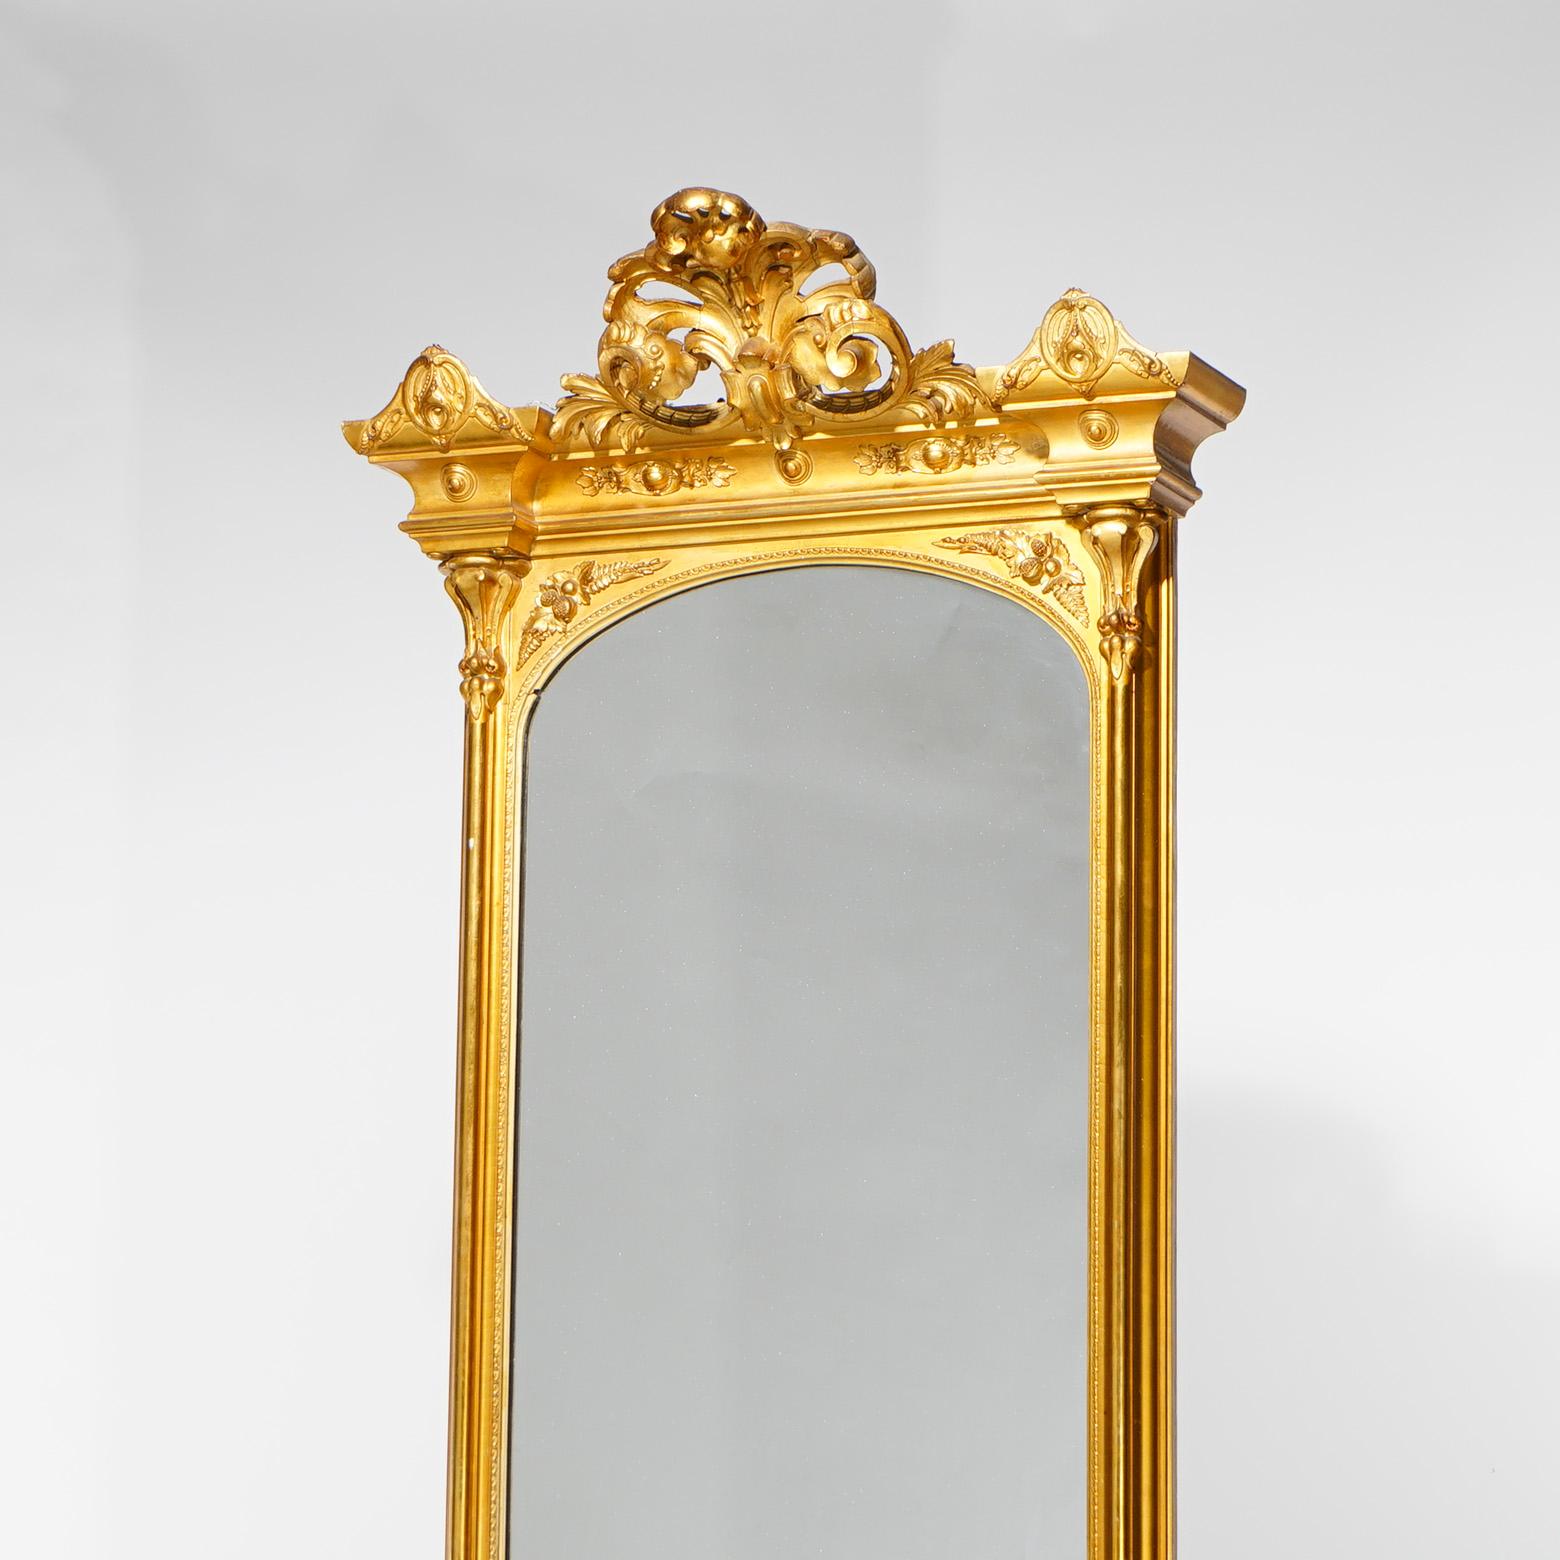 A French Louis XVI style hall pier mirror offers giltwood frame with foliate form cartouche over mirror seated on base with shaped marble top and raised on cabriole legs, foliate elements throughout, circa 1870

Measures - 86.5